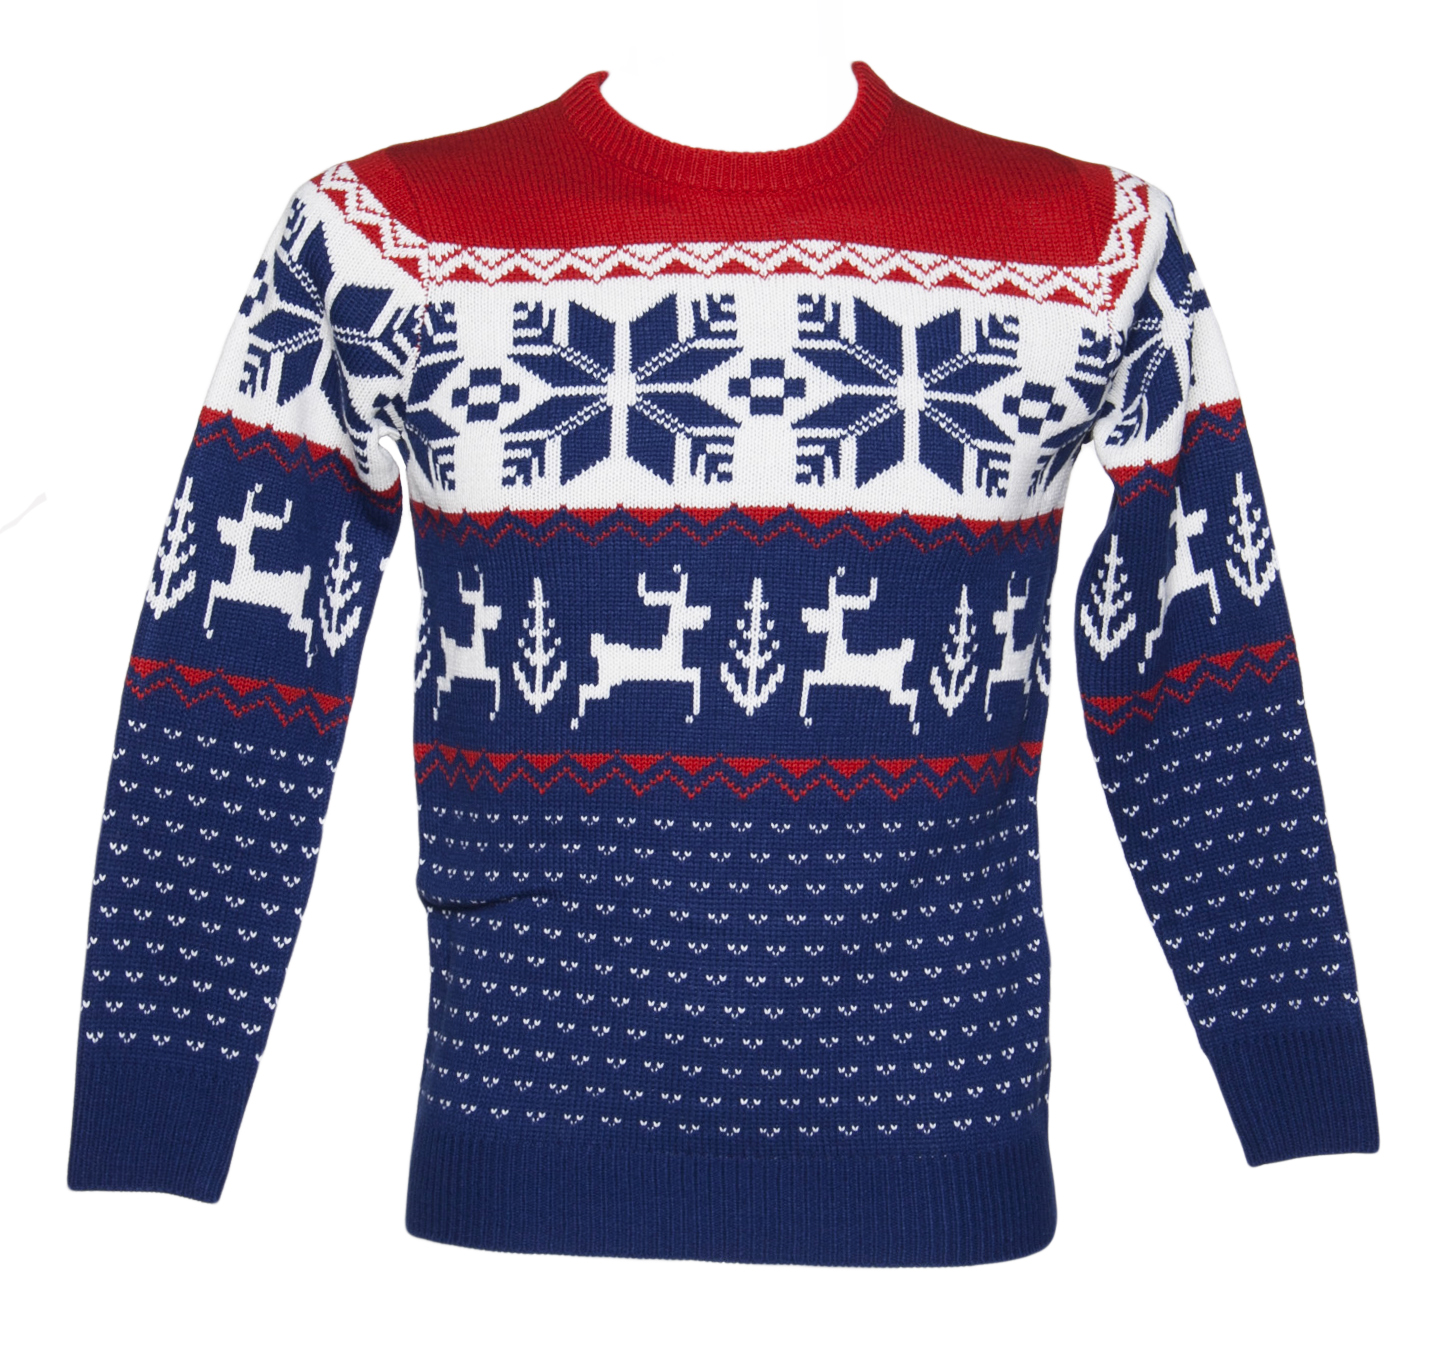 Cheesy Christmas Jumpers Unisex Blue and Red Wonderland Knitted Christmas